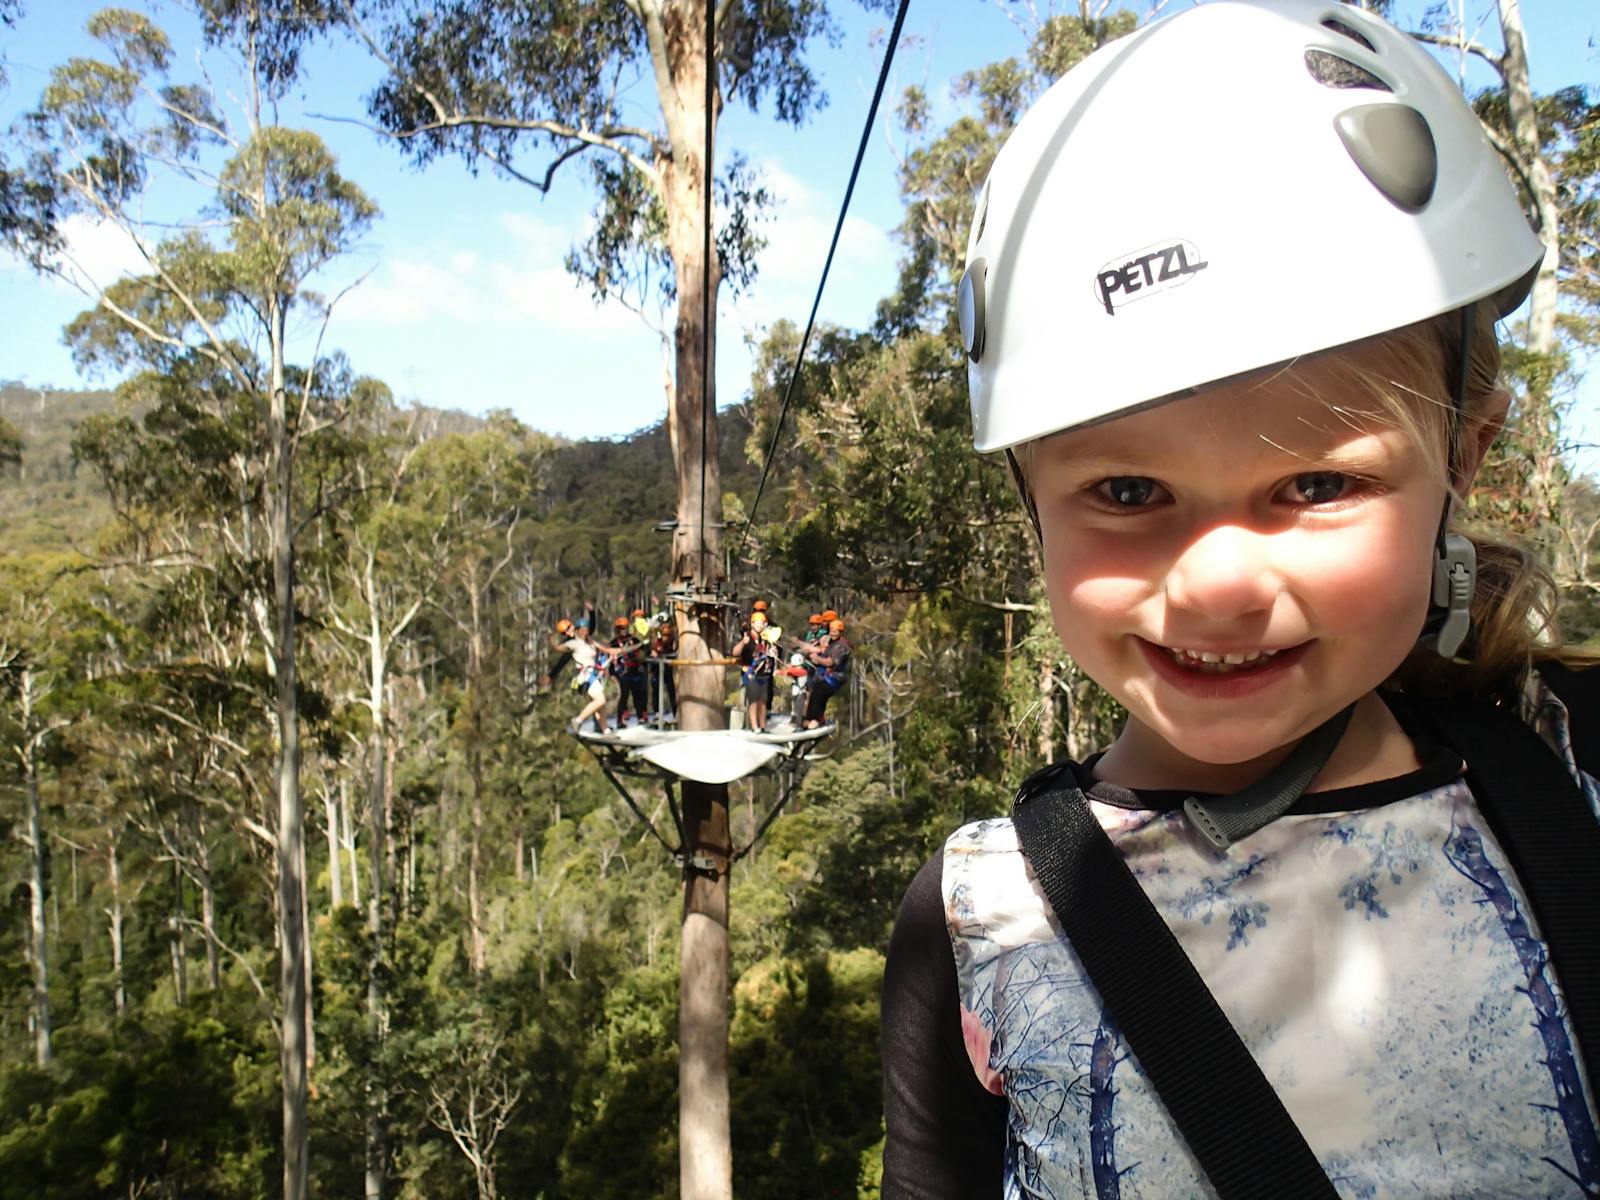 Soar up to 50m high above the forest floor